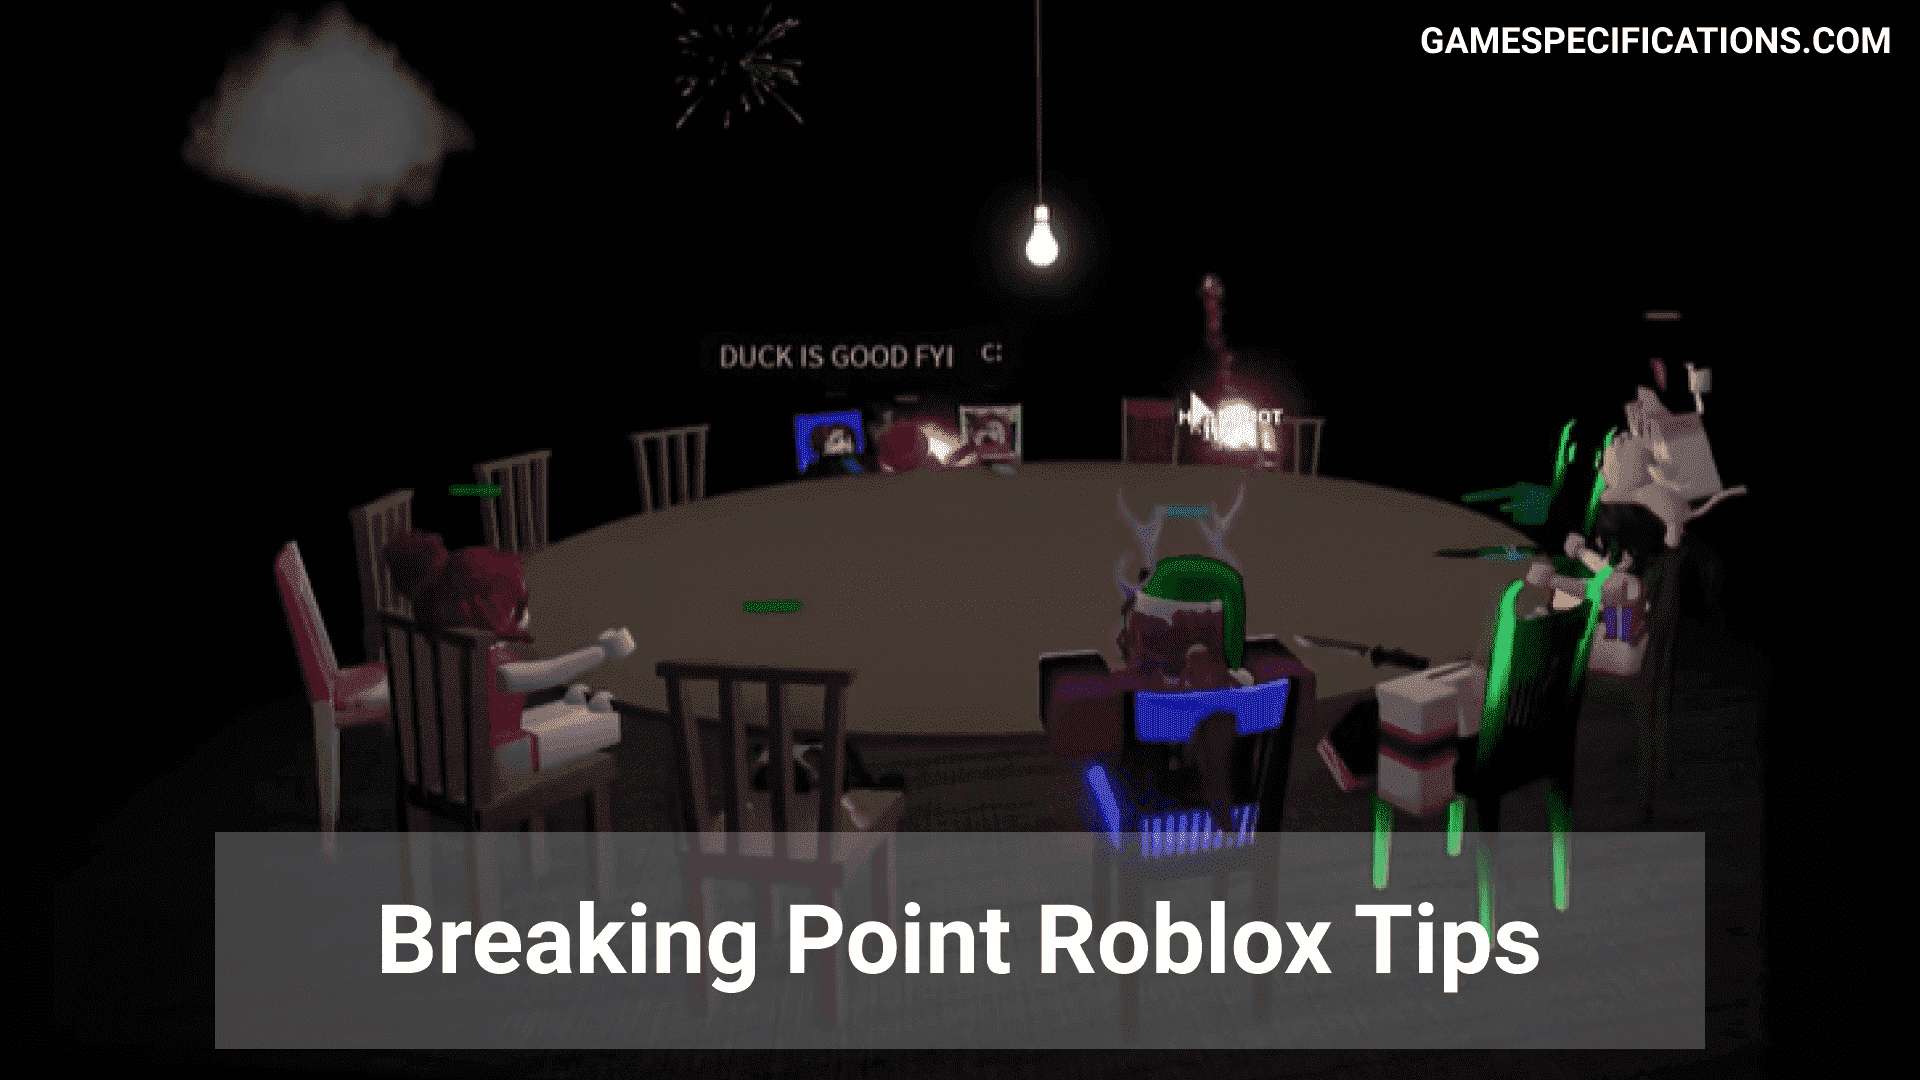 Breaking Point Roblox Guide 11 Tips And Tricks To Secure A Victory Game Specifications - roblox shadows improver